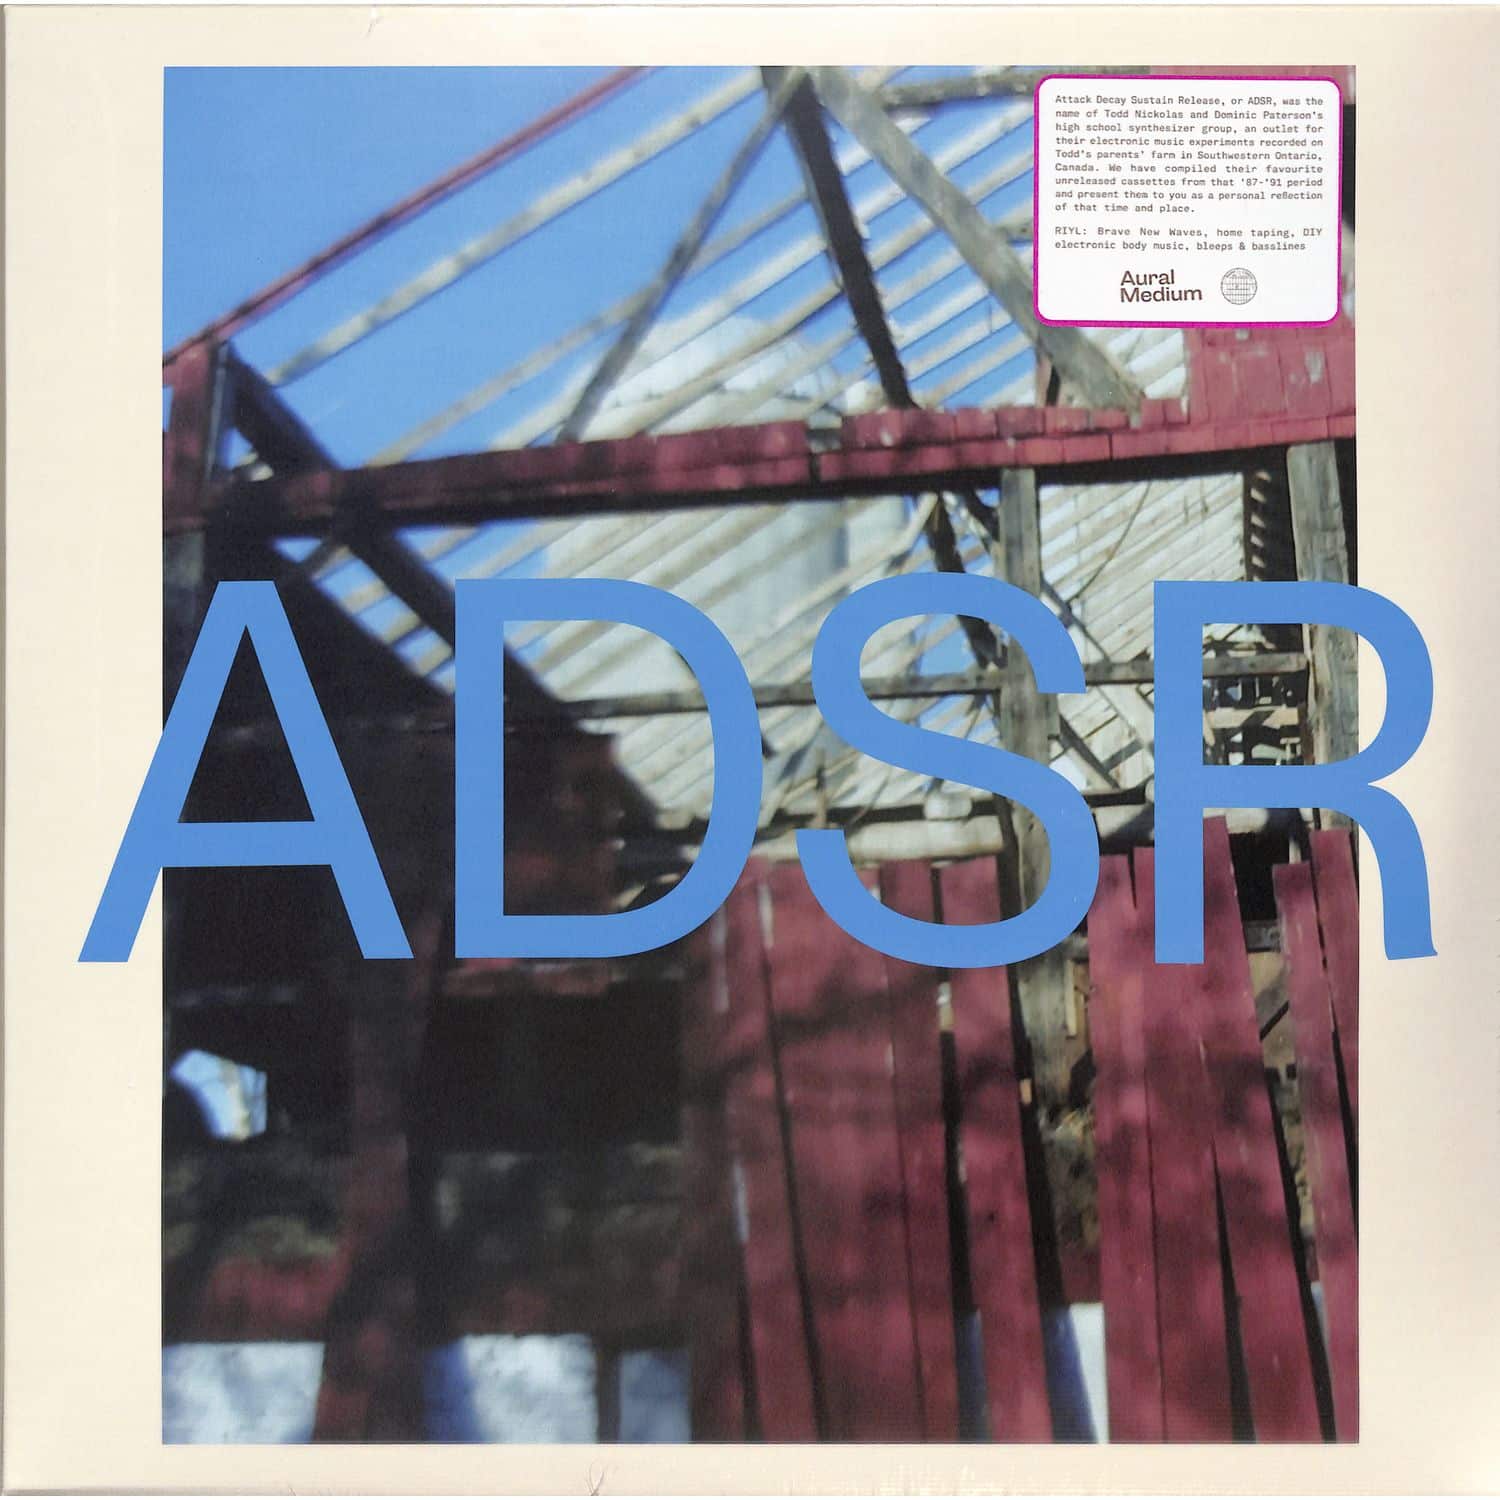 ADSR - POISED OVER PAUSE BUTTONS 